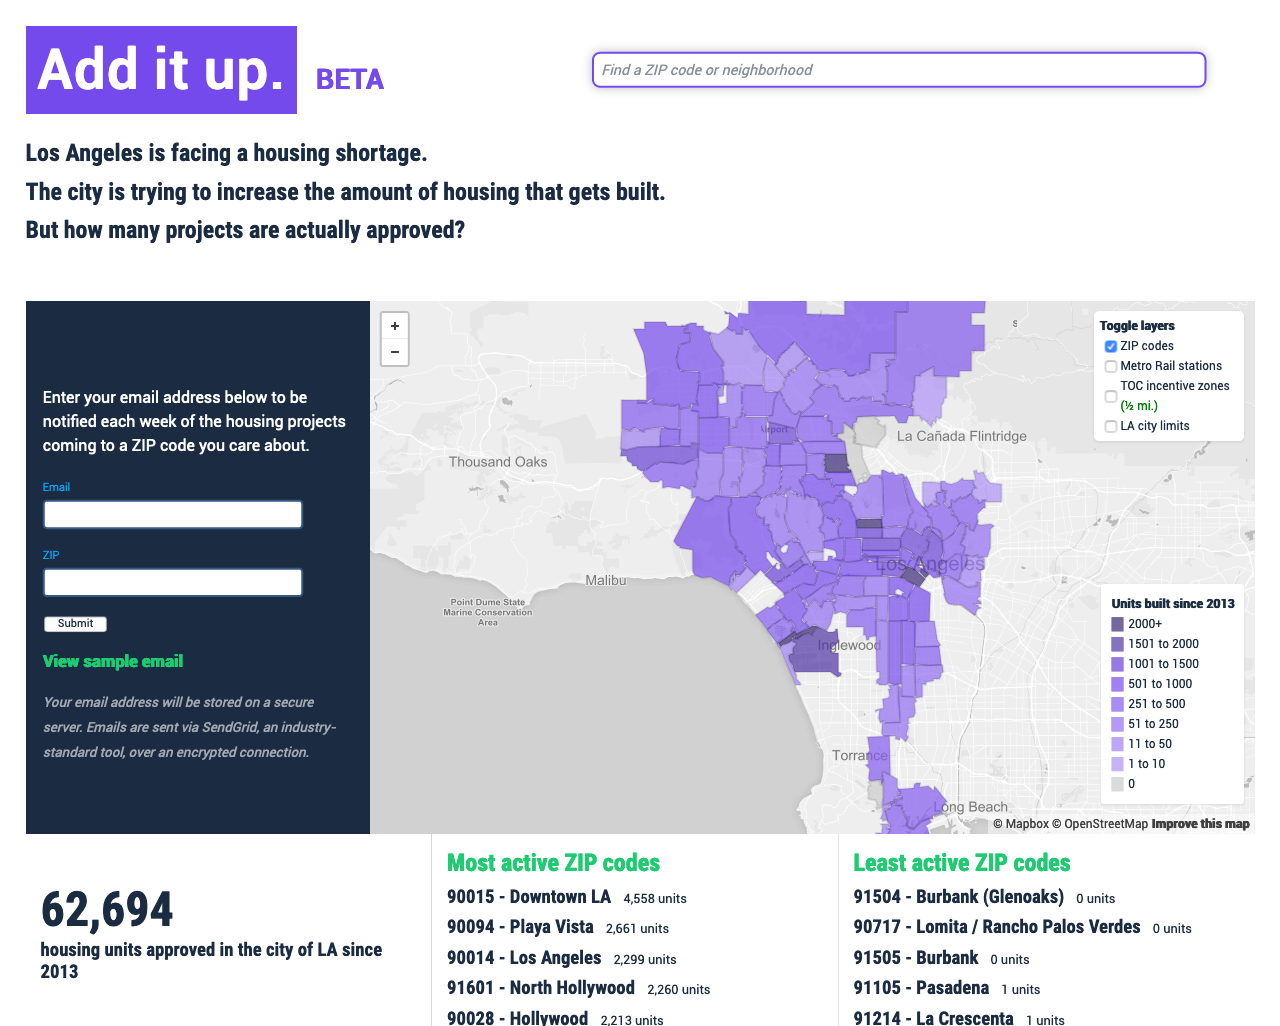 The homepage of Add it up, featuring a chloropleth map, a newsletter signup form, and high-level housing construction statistics.